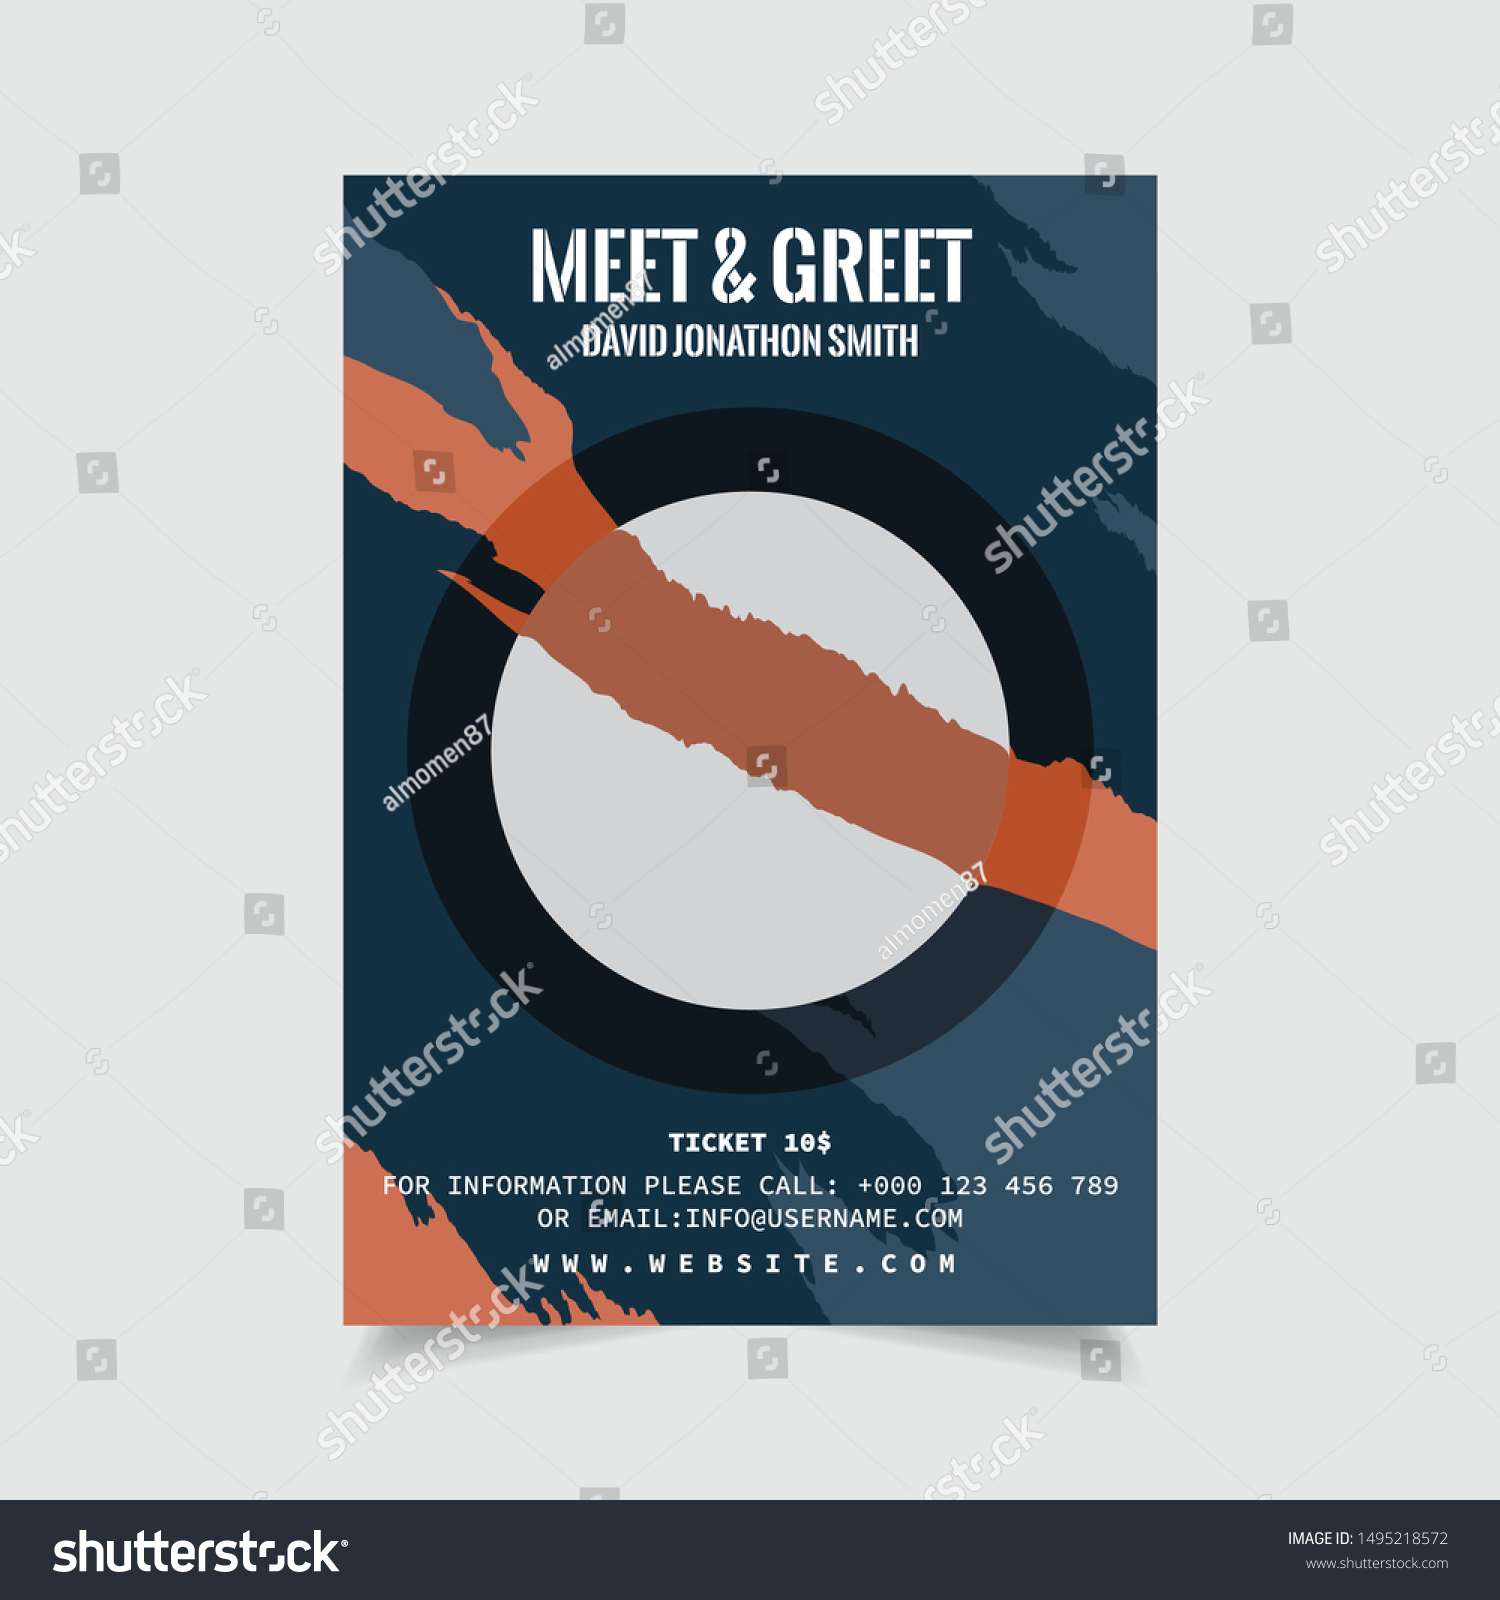 Meet Greet Flyer Templates Celebrities Stock Vector (Royalty Pertaining To Meet And Greet Flyers Templates